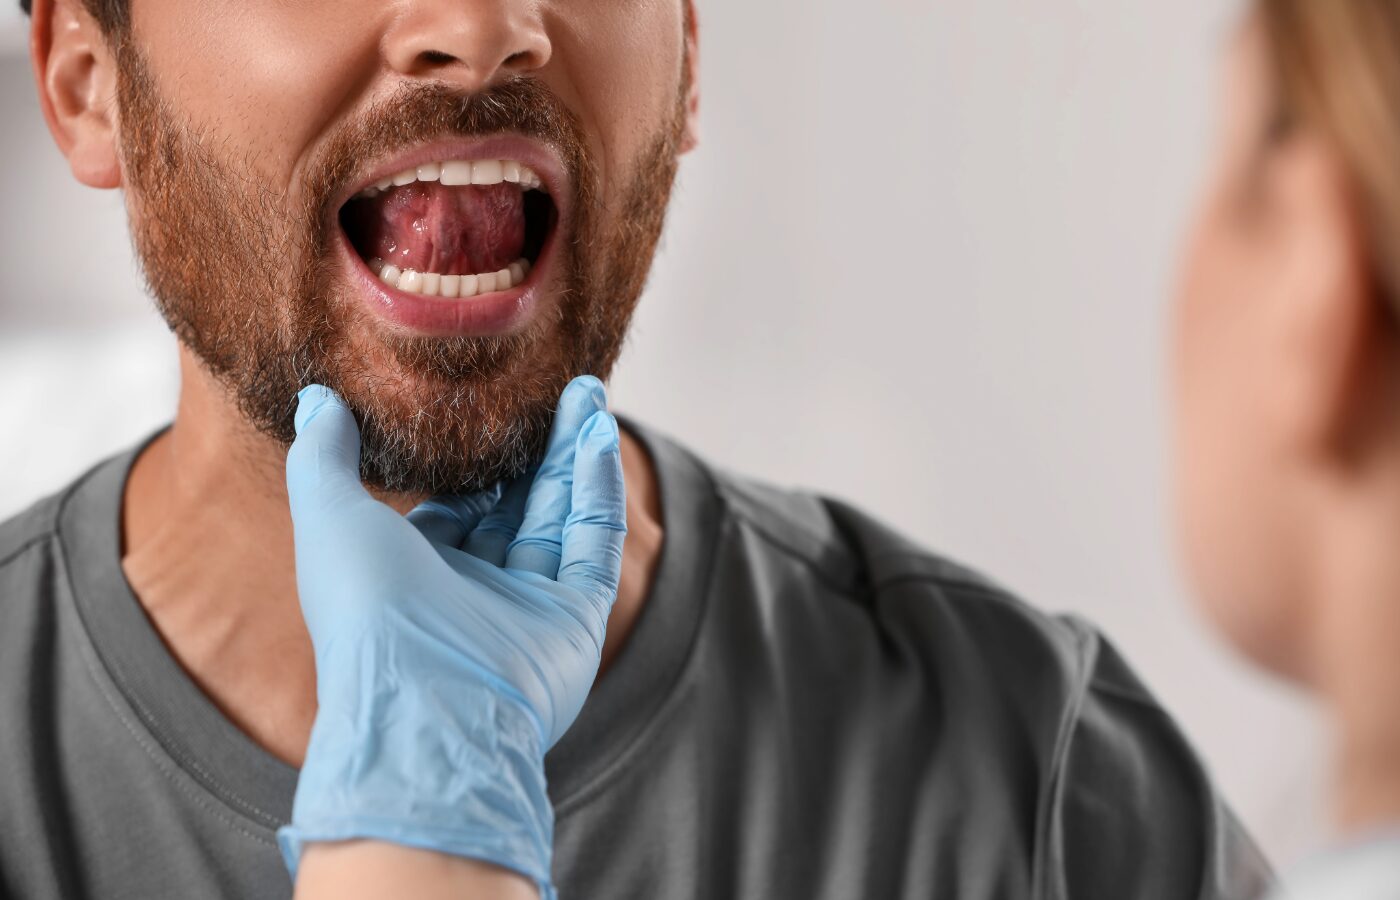 A man with a beard works with a myofunctinal therapist to address orofacial muscle deficiencies